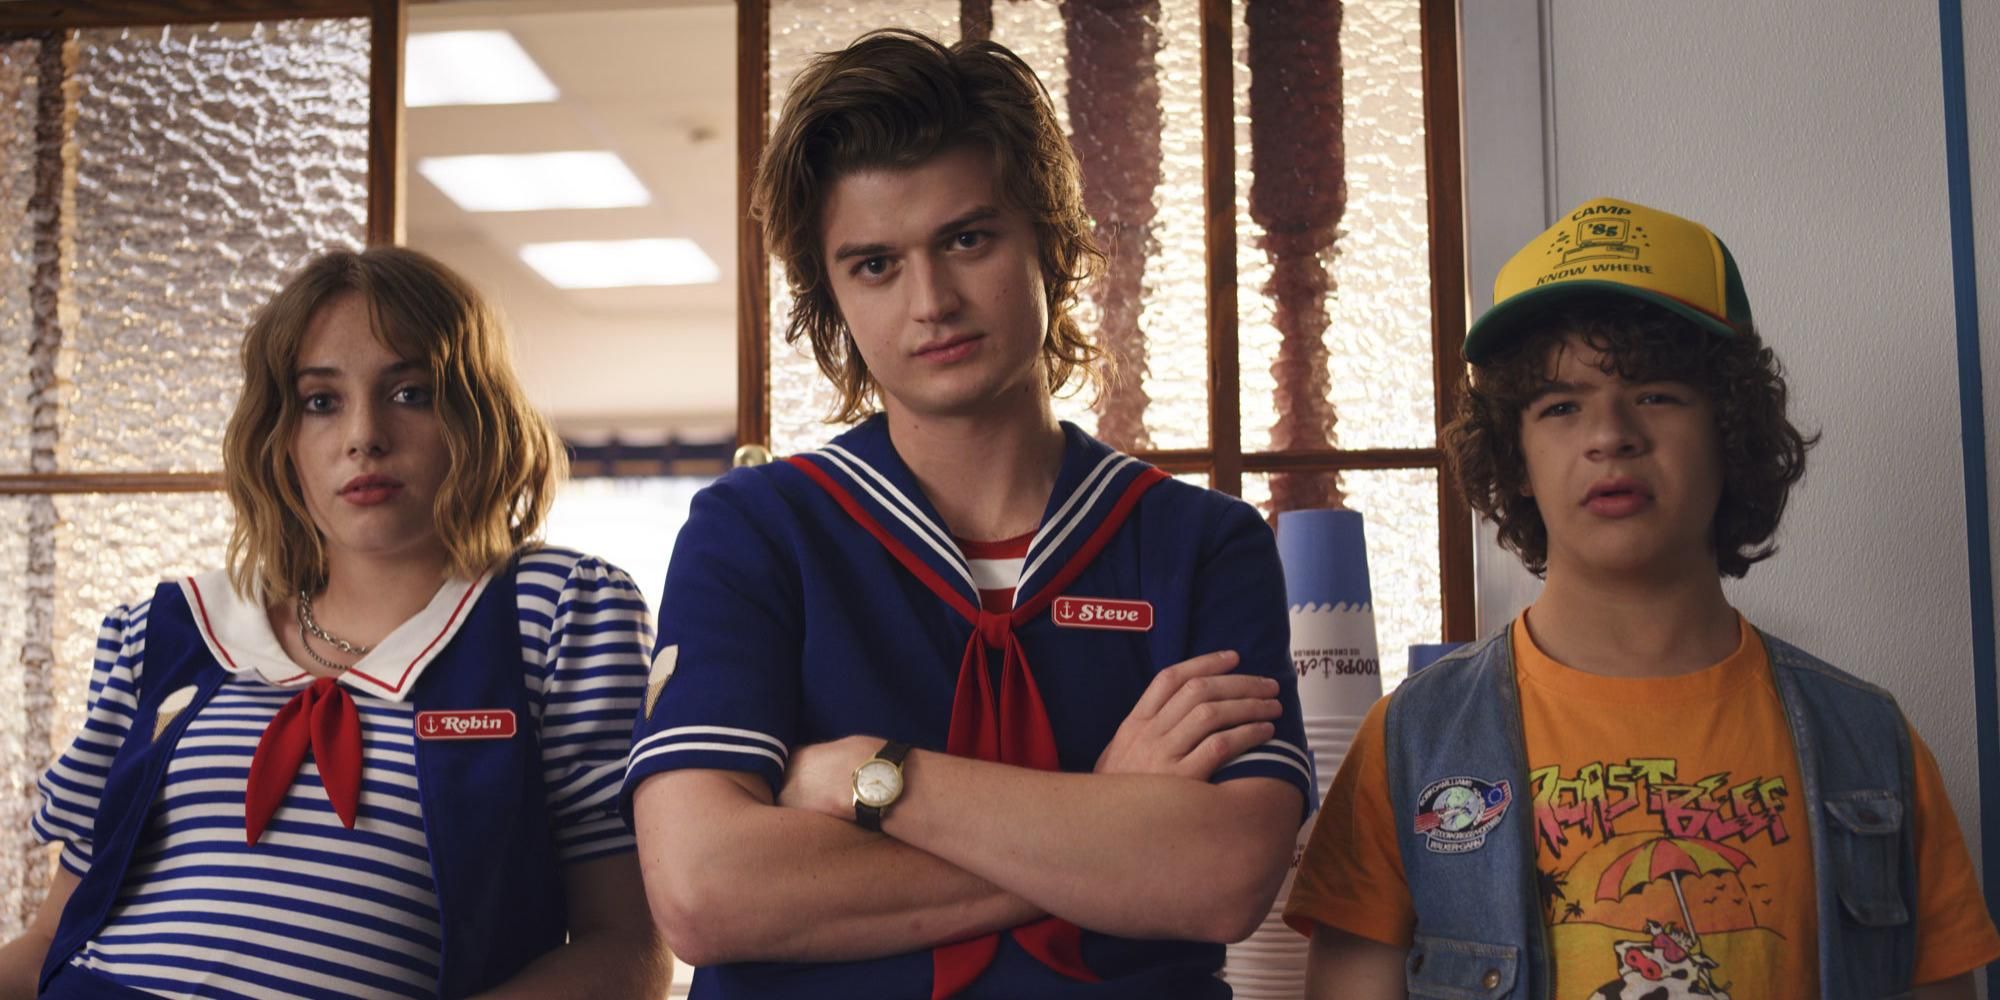 The Scoop Troop as they appeared in Stranger Things